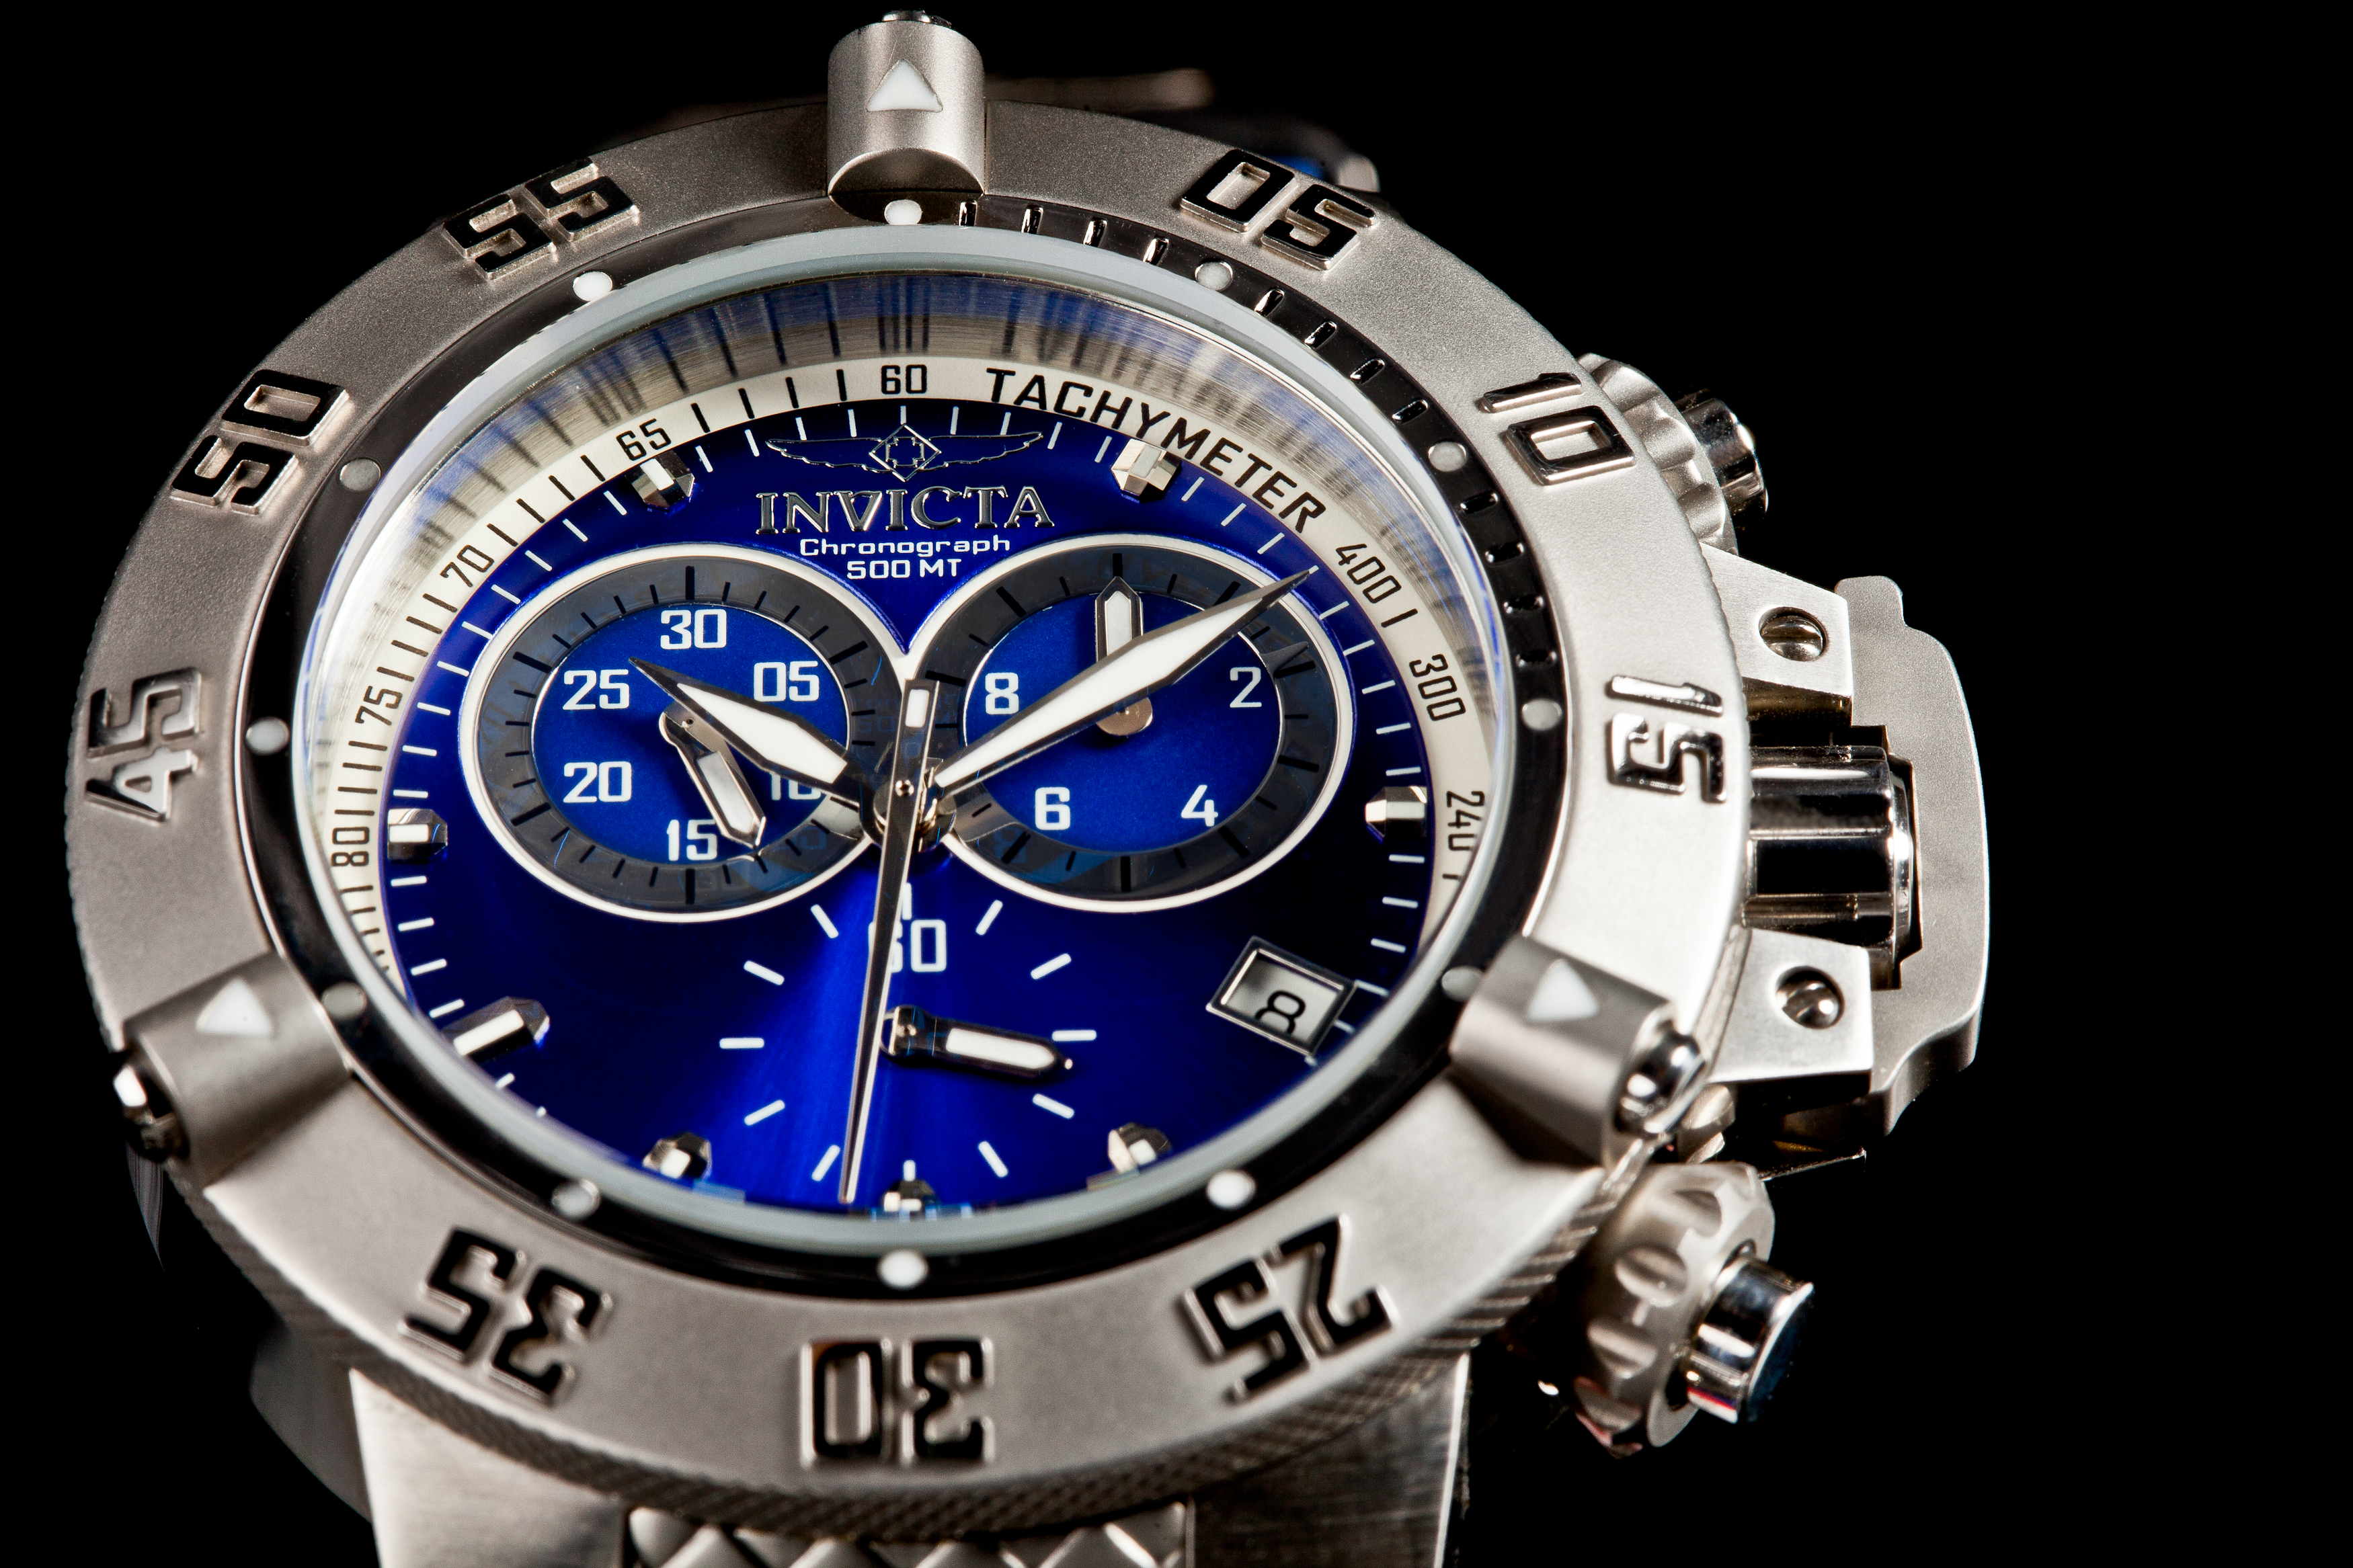 Invicta Watches - At Affordable Prices Unmatched Standard